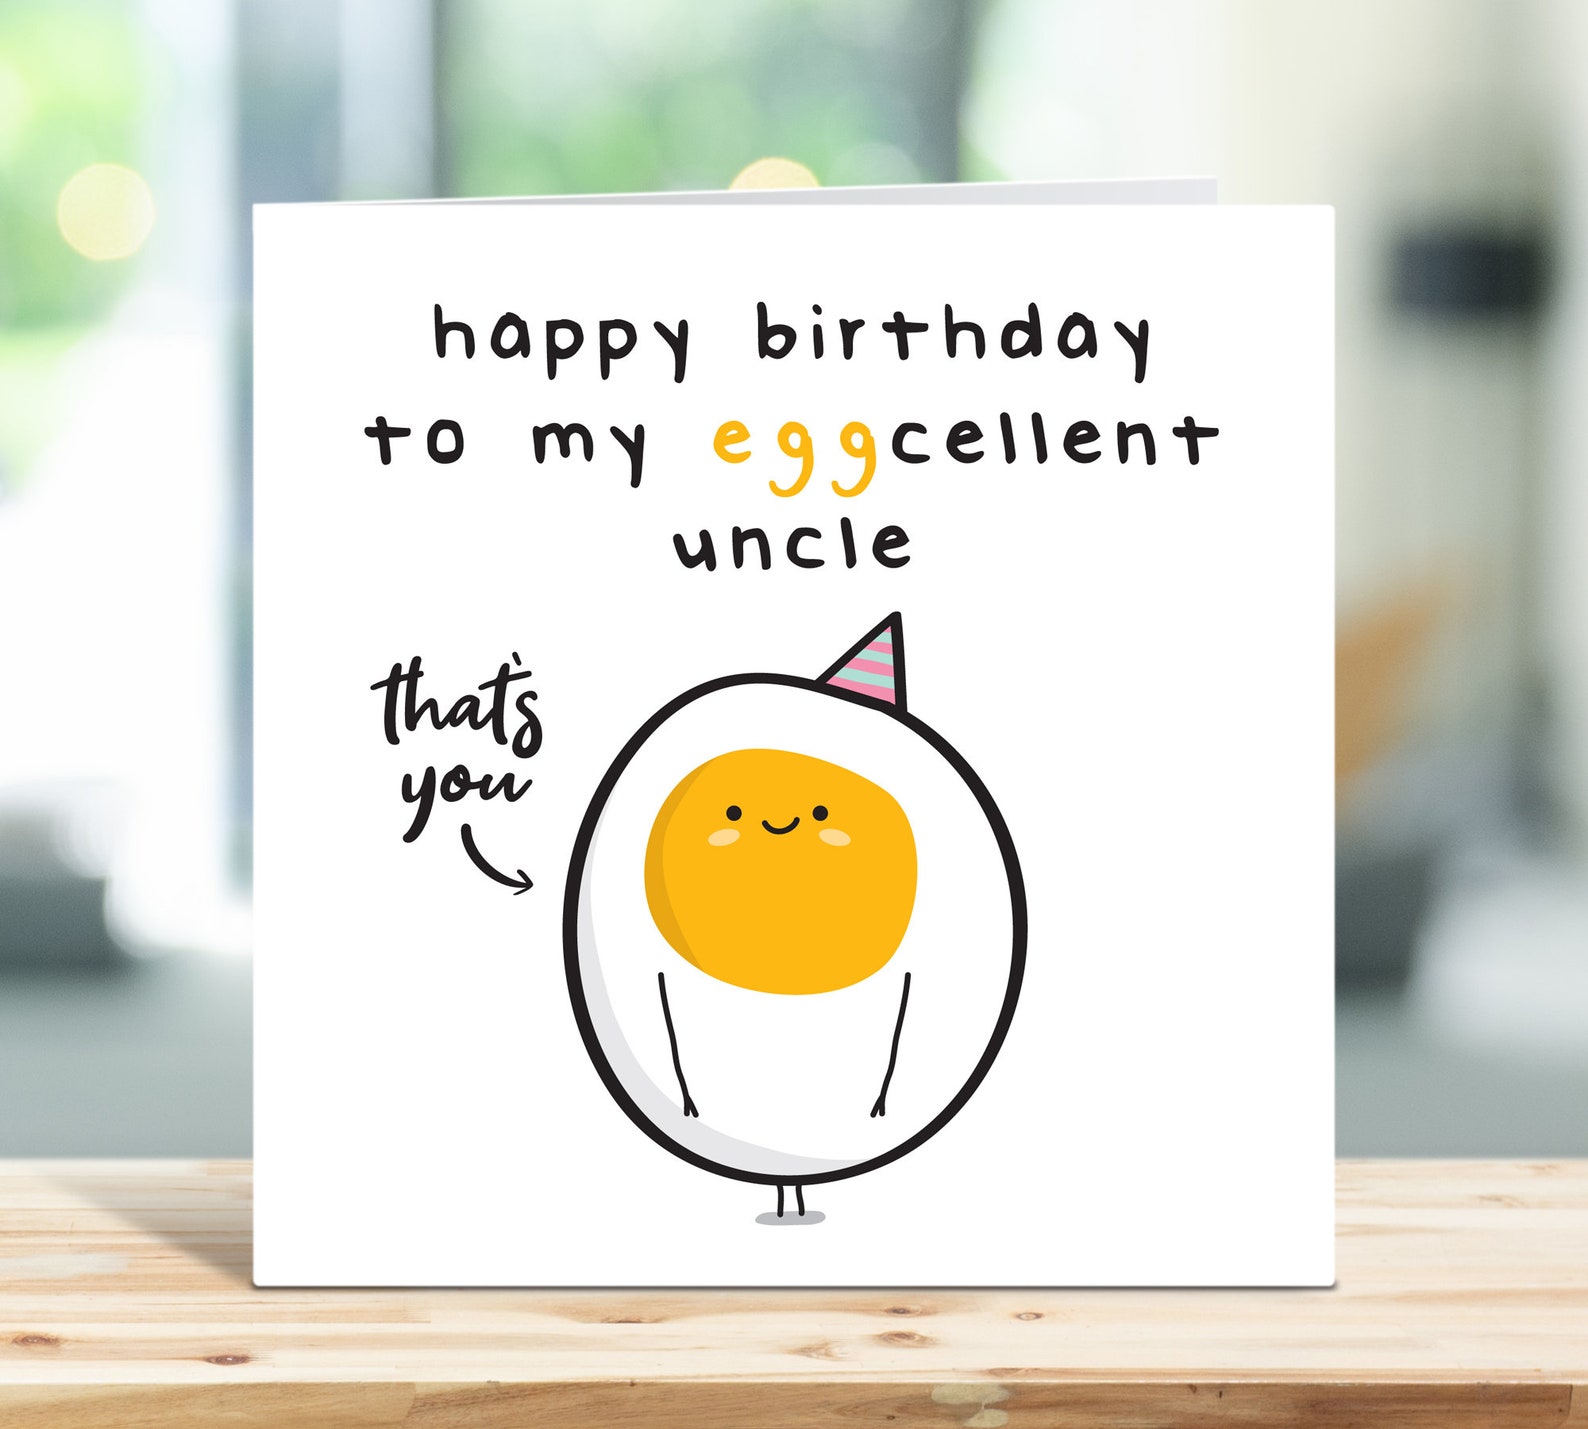 funny-uncle-birthday-cards-best-25-happy-birthday-uncle-ideas-on